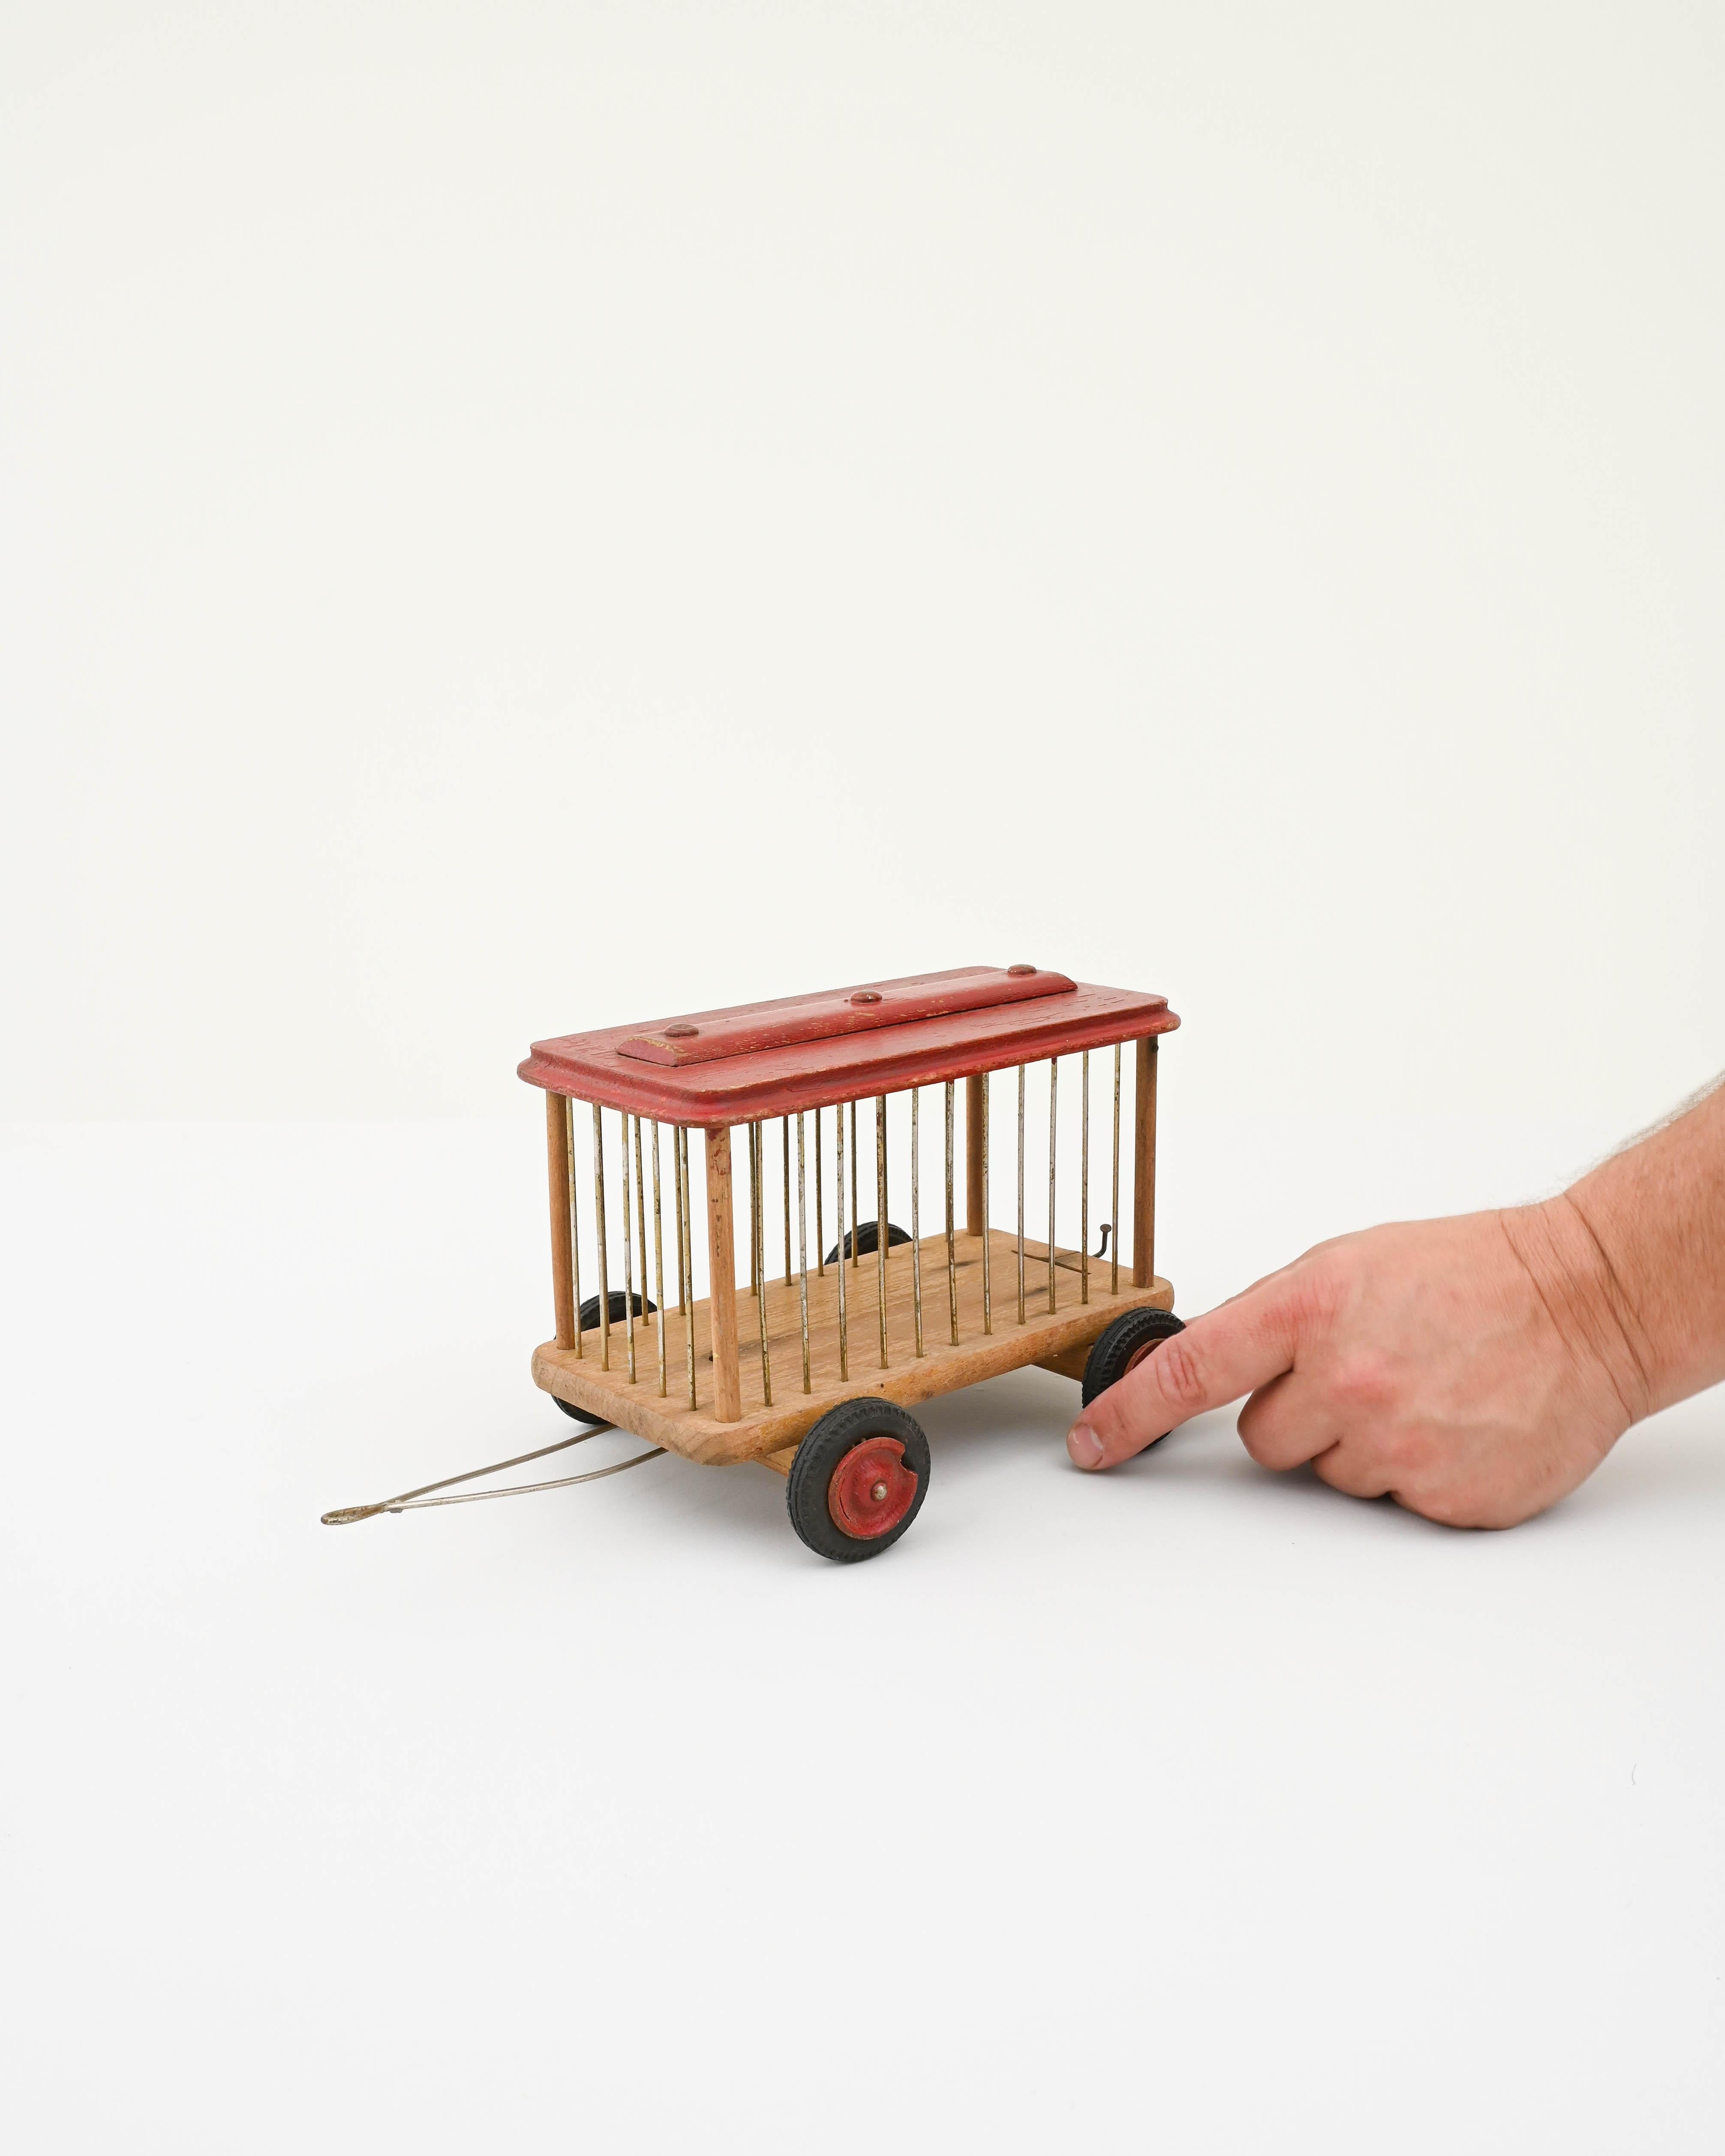 Transport yourself back in time with this charming 20th-century French Wooden Toy Car—a delightful creation that echoes the simplicity and charm of vintage playthings. Crafted with care, this wooden car takes the form of a whimsical cage on wheels,